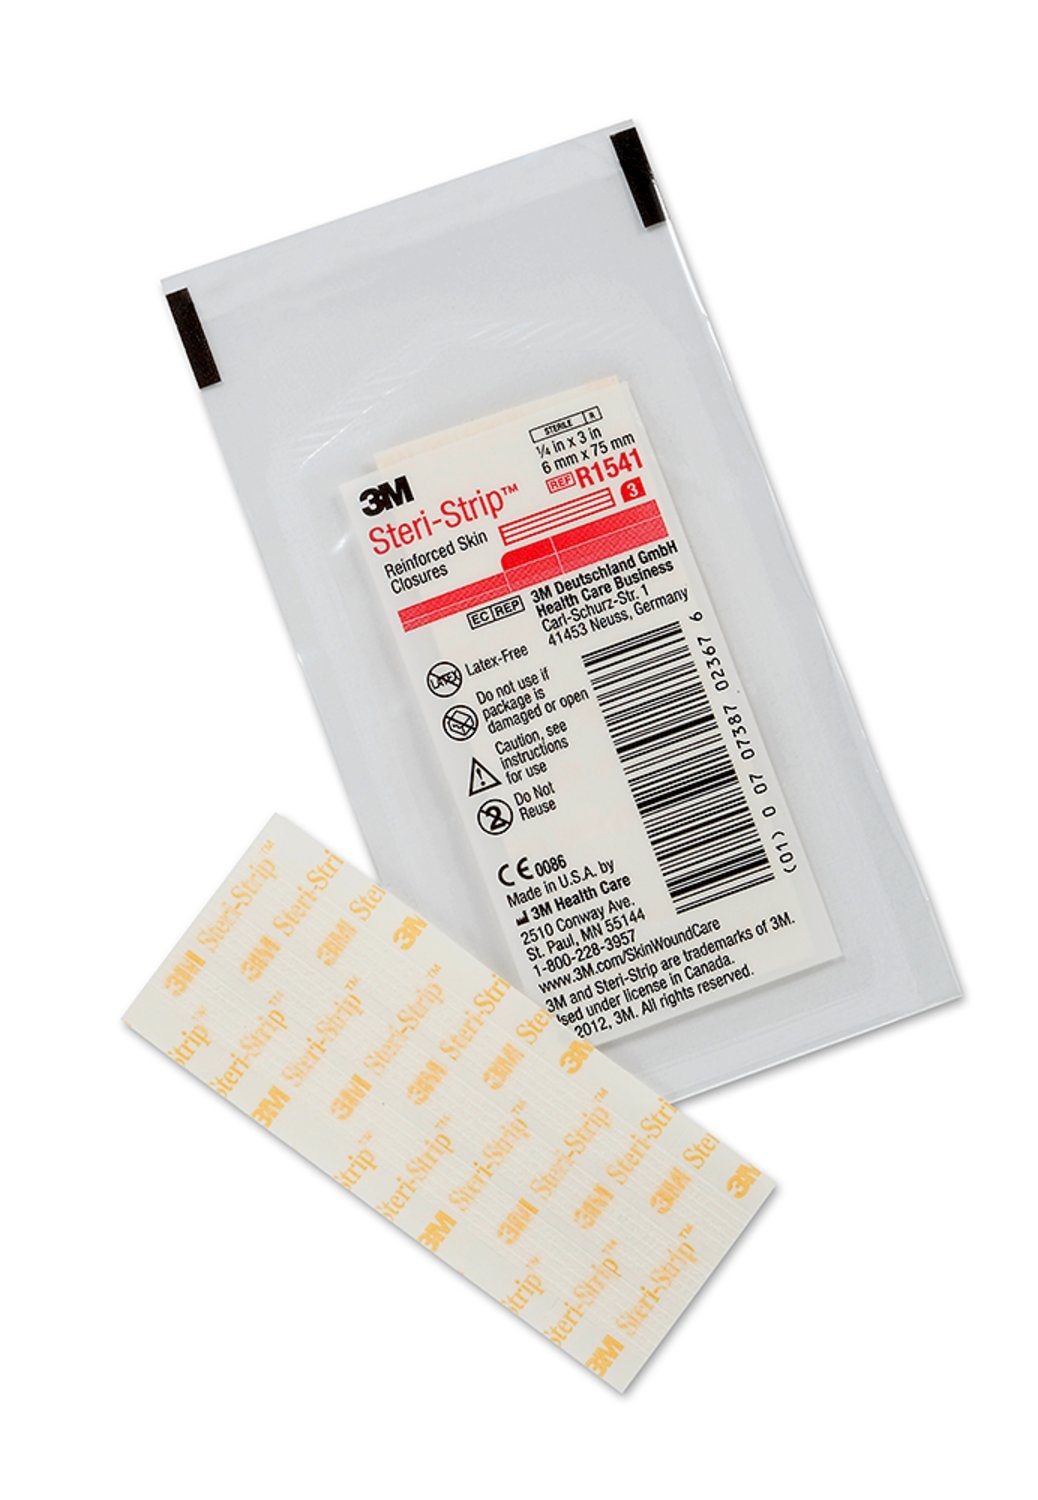 3M Steri-Strip Reinforced Adhesive Skin Closures 75 x 6mm - EACHES image 0